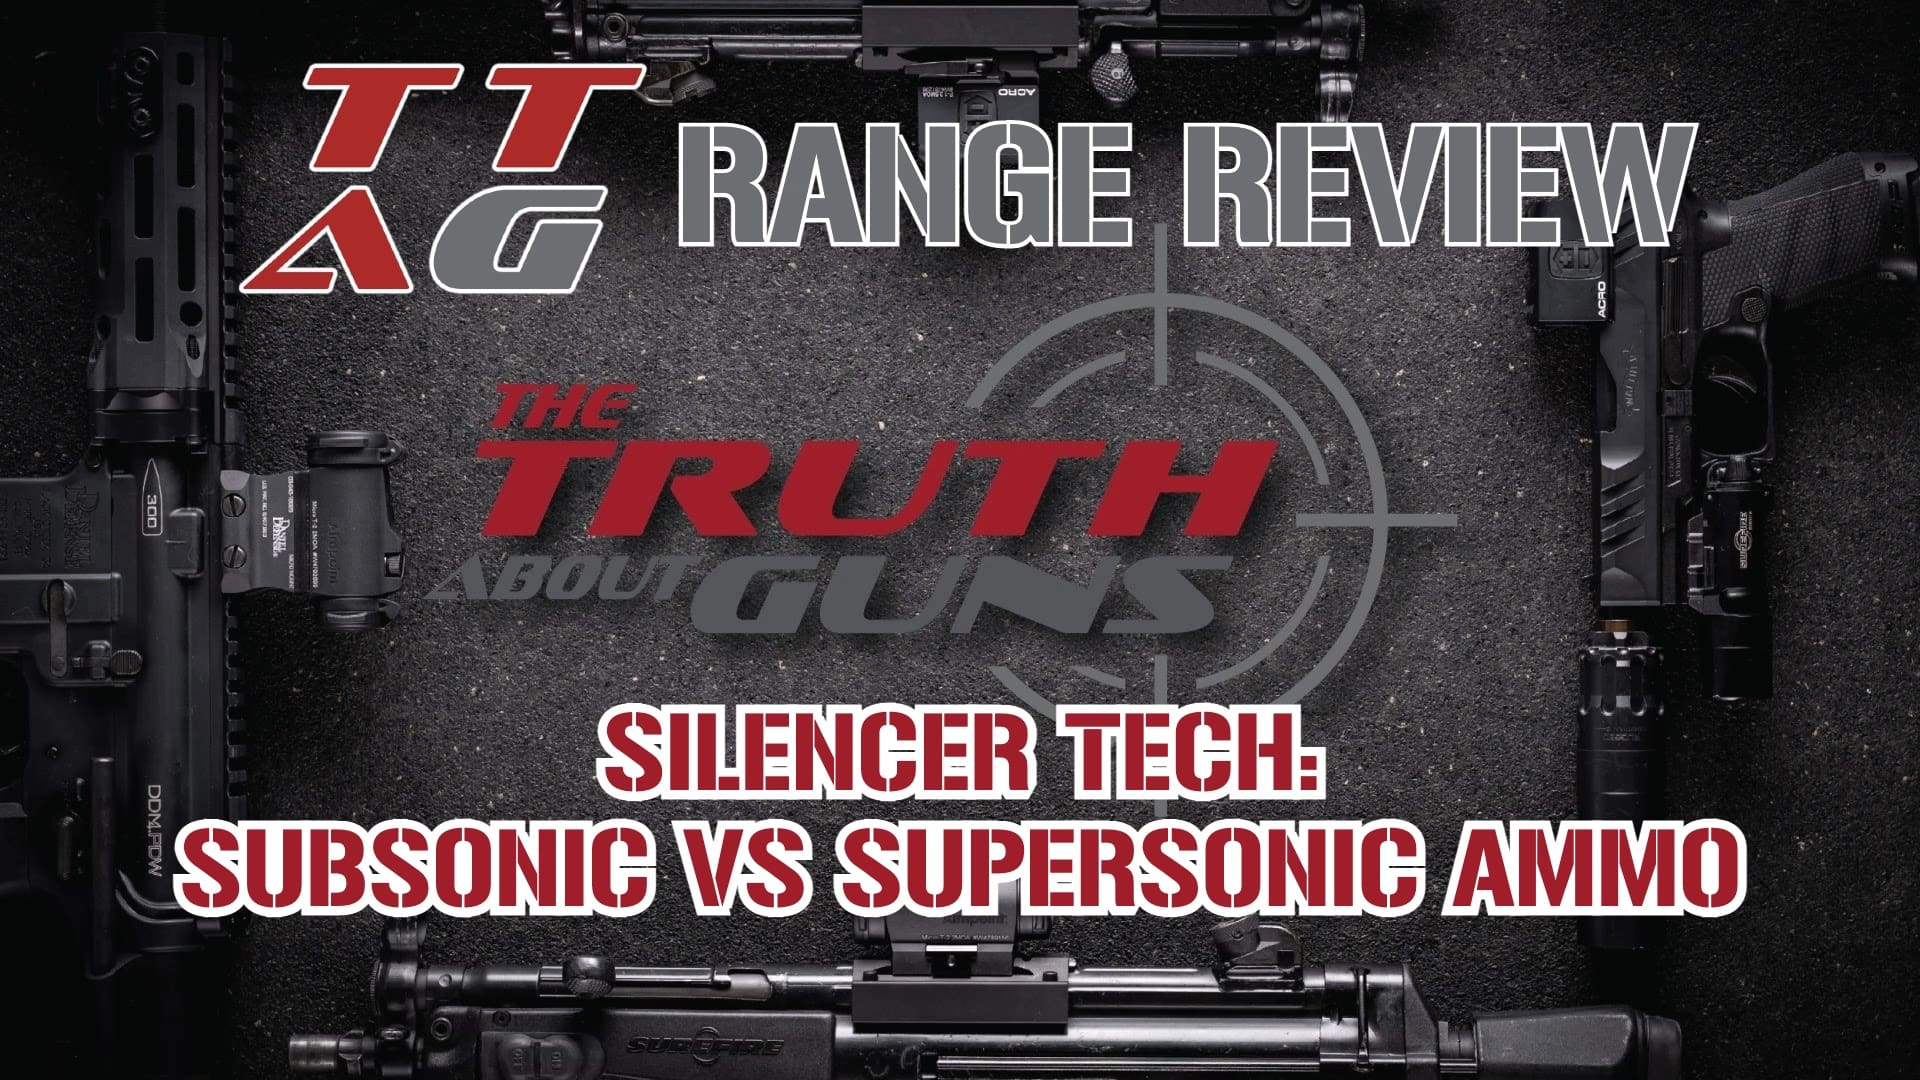 22lr supersonic vs subsonic